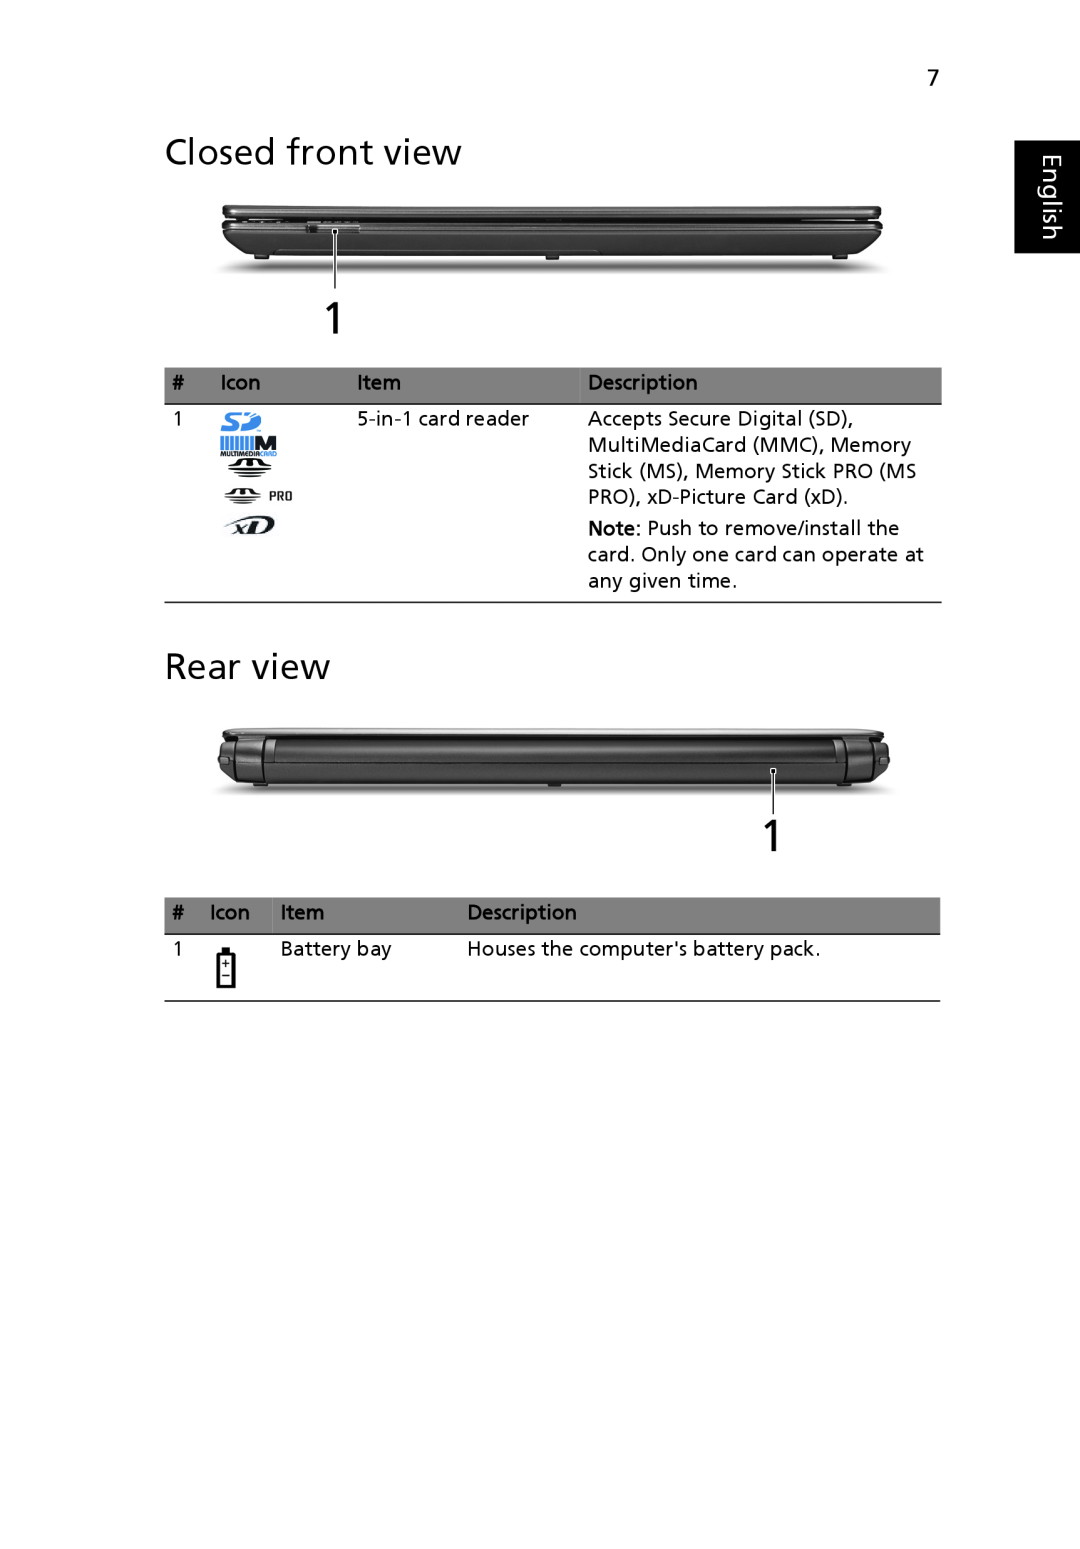 Acer 3935 manual Closed front view, Rear view, # Icon Item, English, Description 